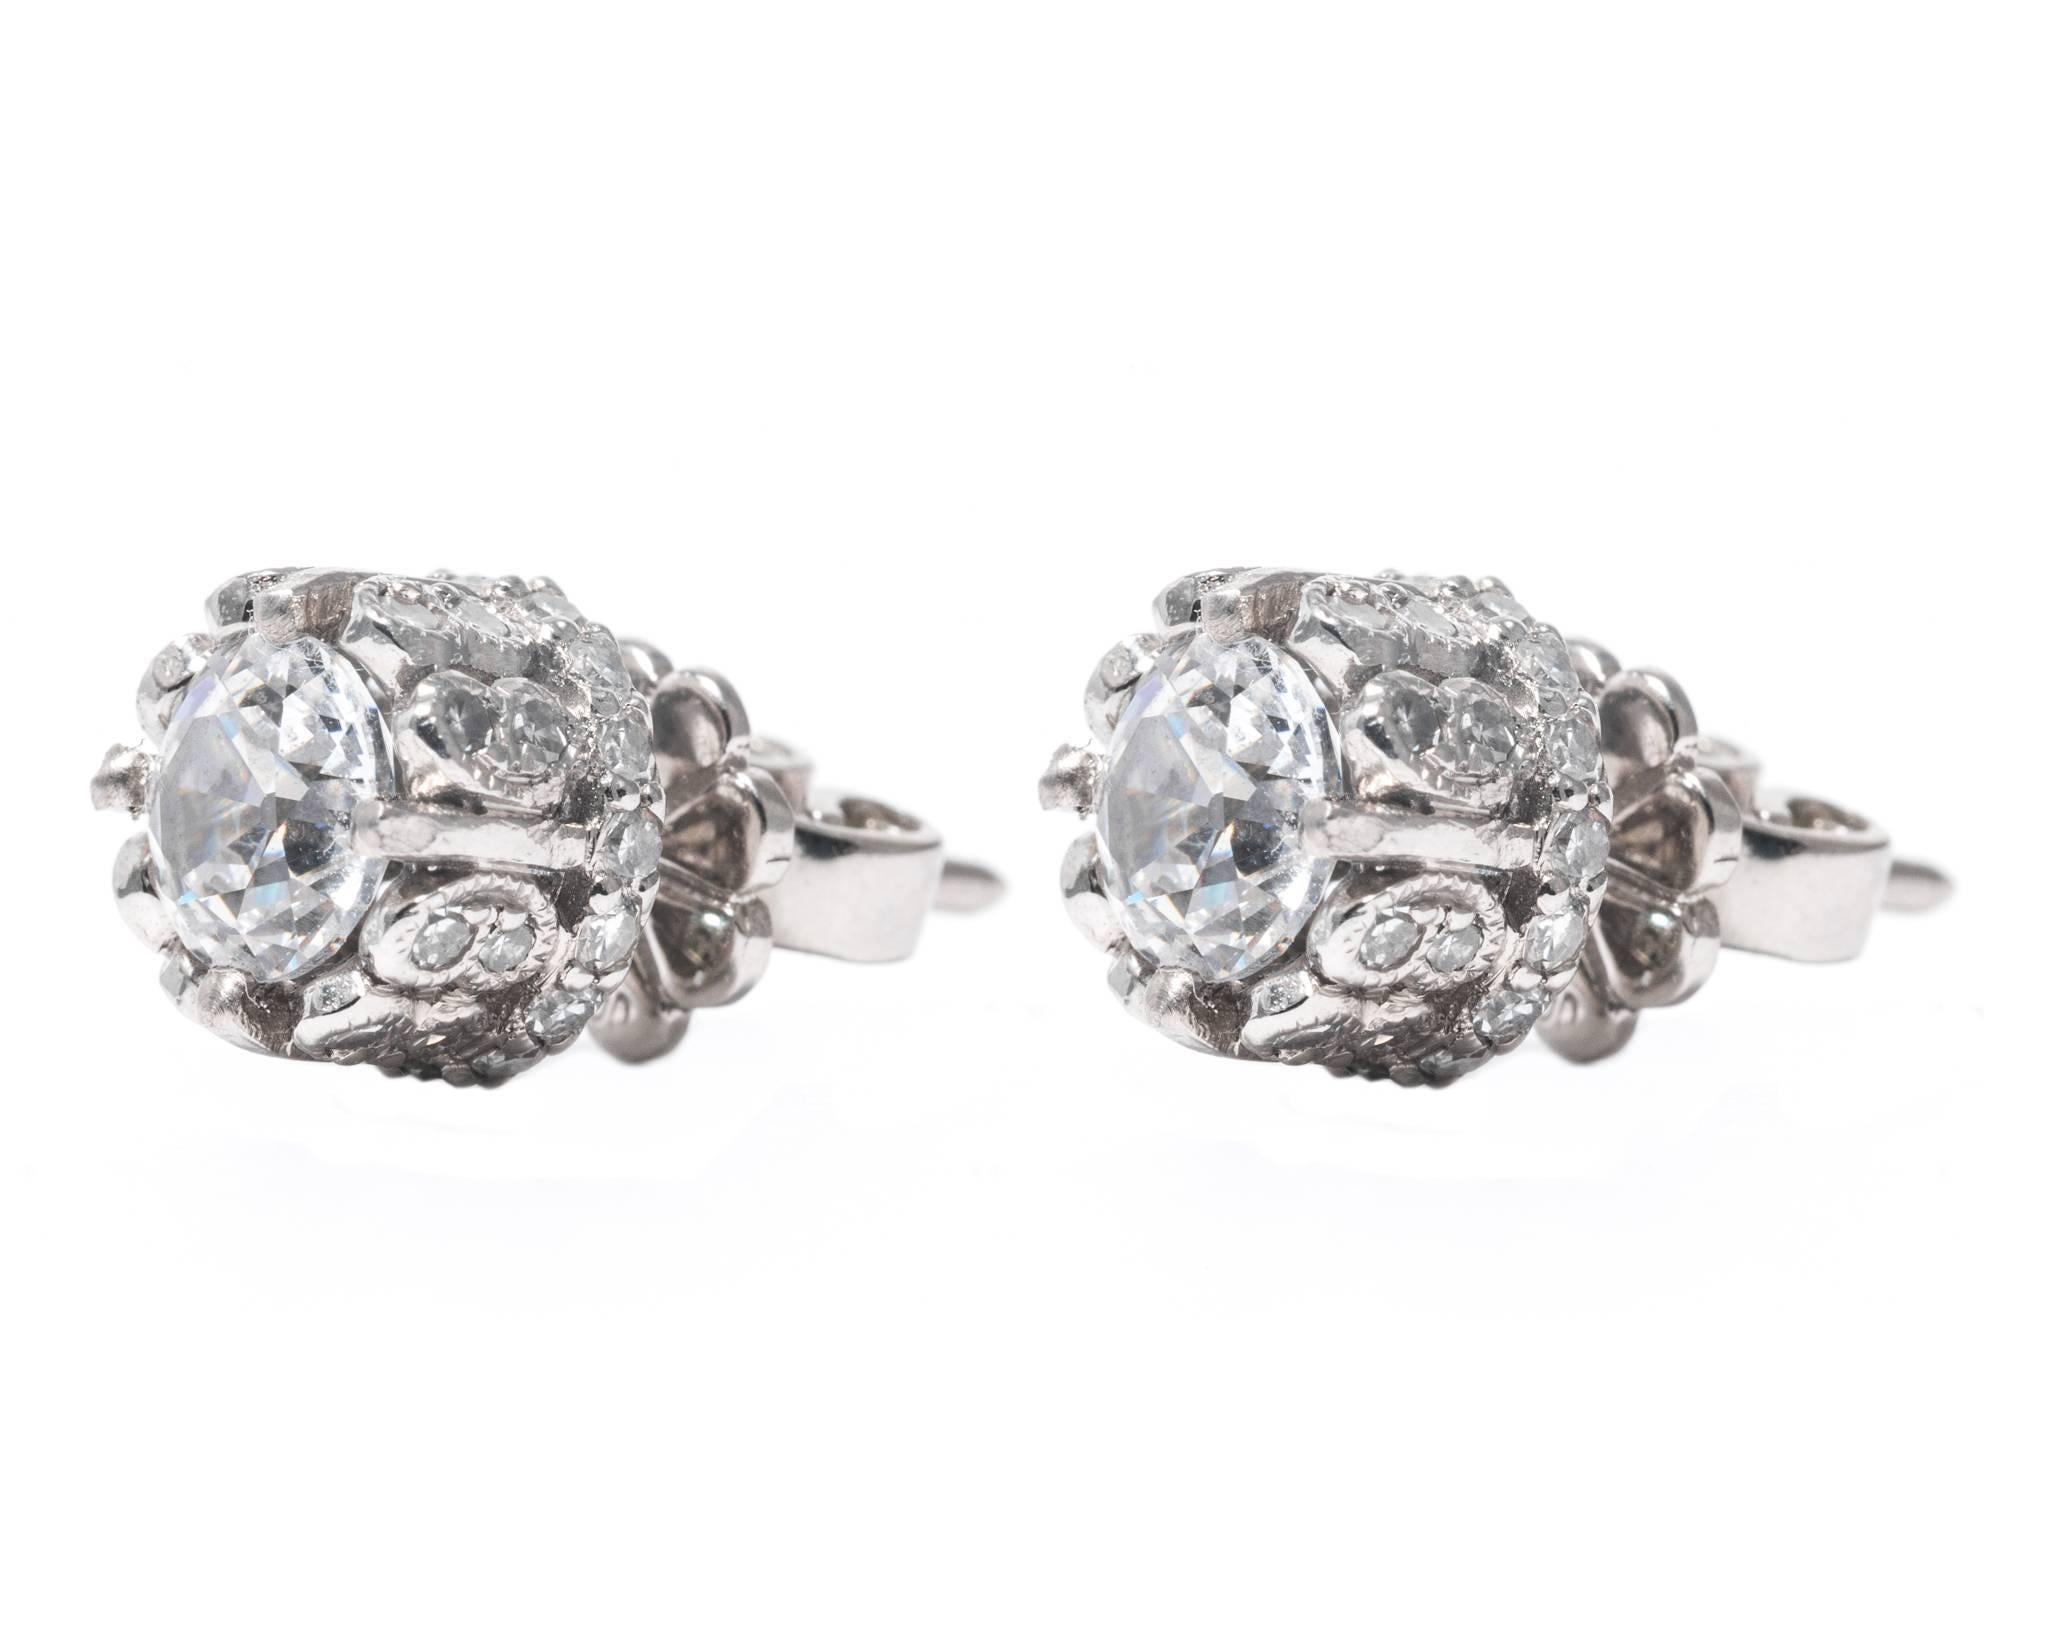 Unique Pave Set European Cut Diamond Stud Earrings in Platinum In Excellent Condition For Sale In Boston, MA